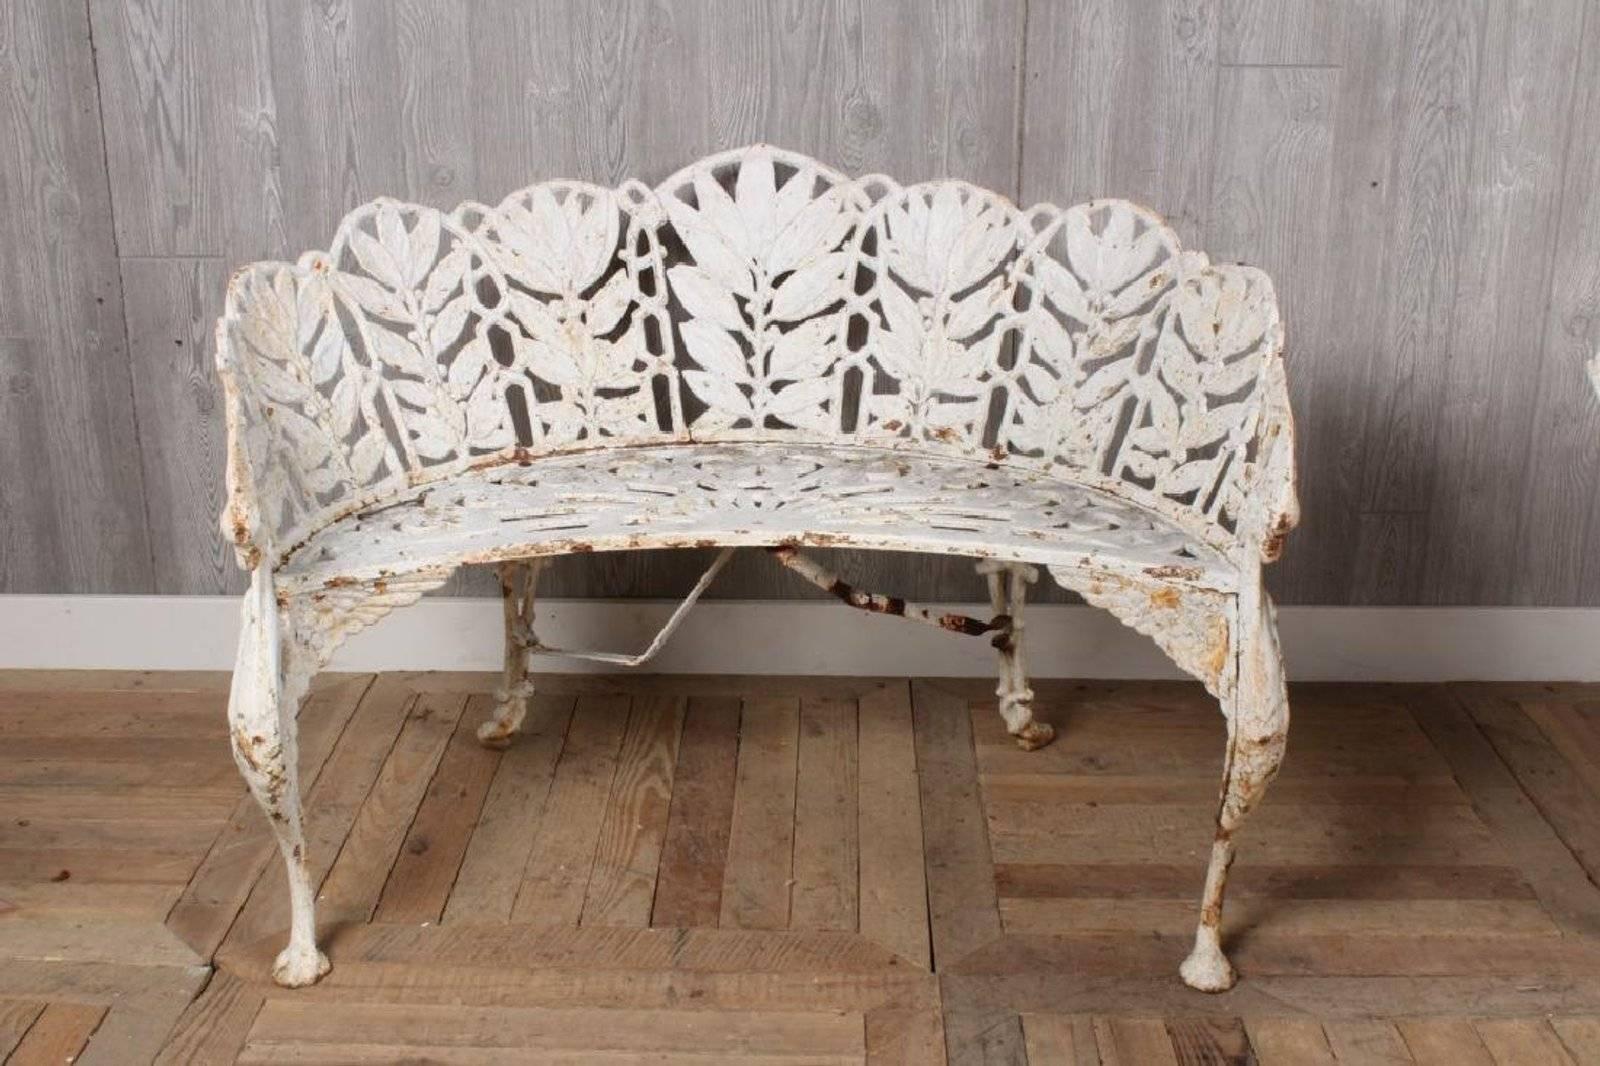 This is an exceptional pair of cast iron garden benches with beautiful painted patina. Laurel Pattern on backs and seats are lush and with defined griffin and cabriole legs.